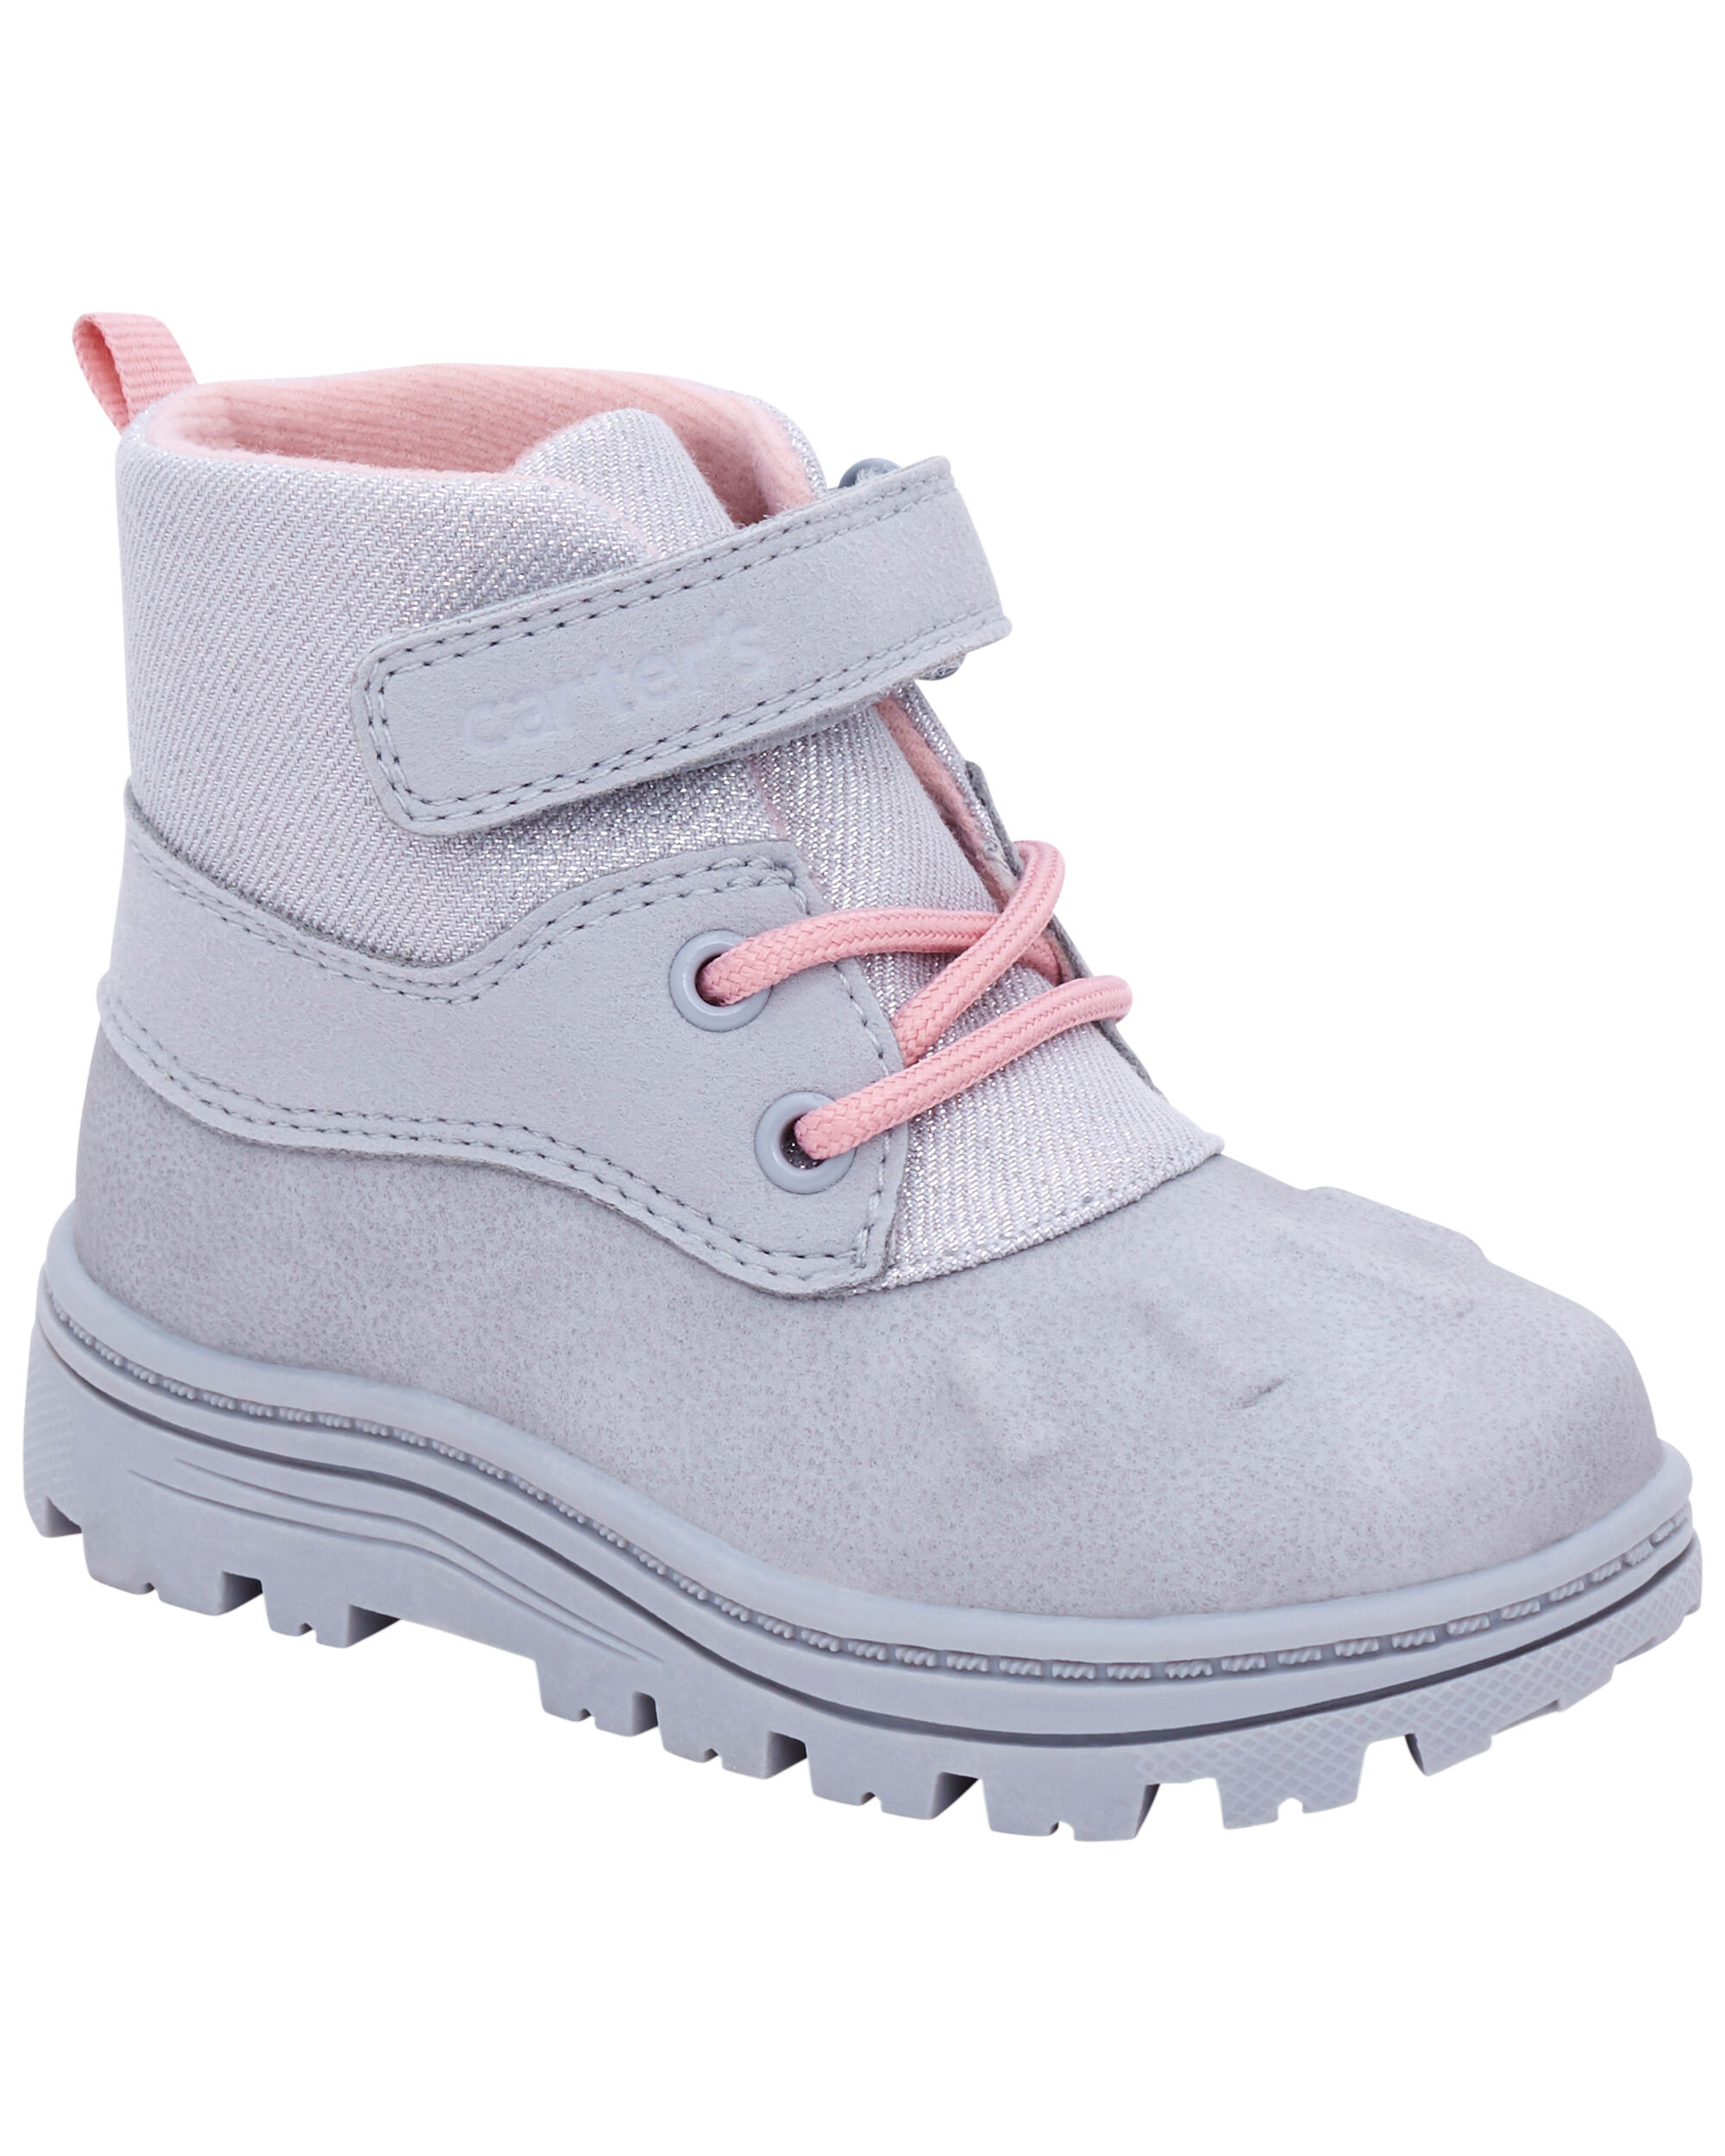 Toddler Carters Duck Boots